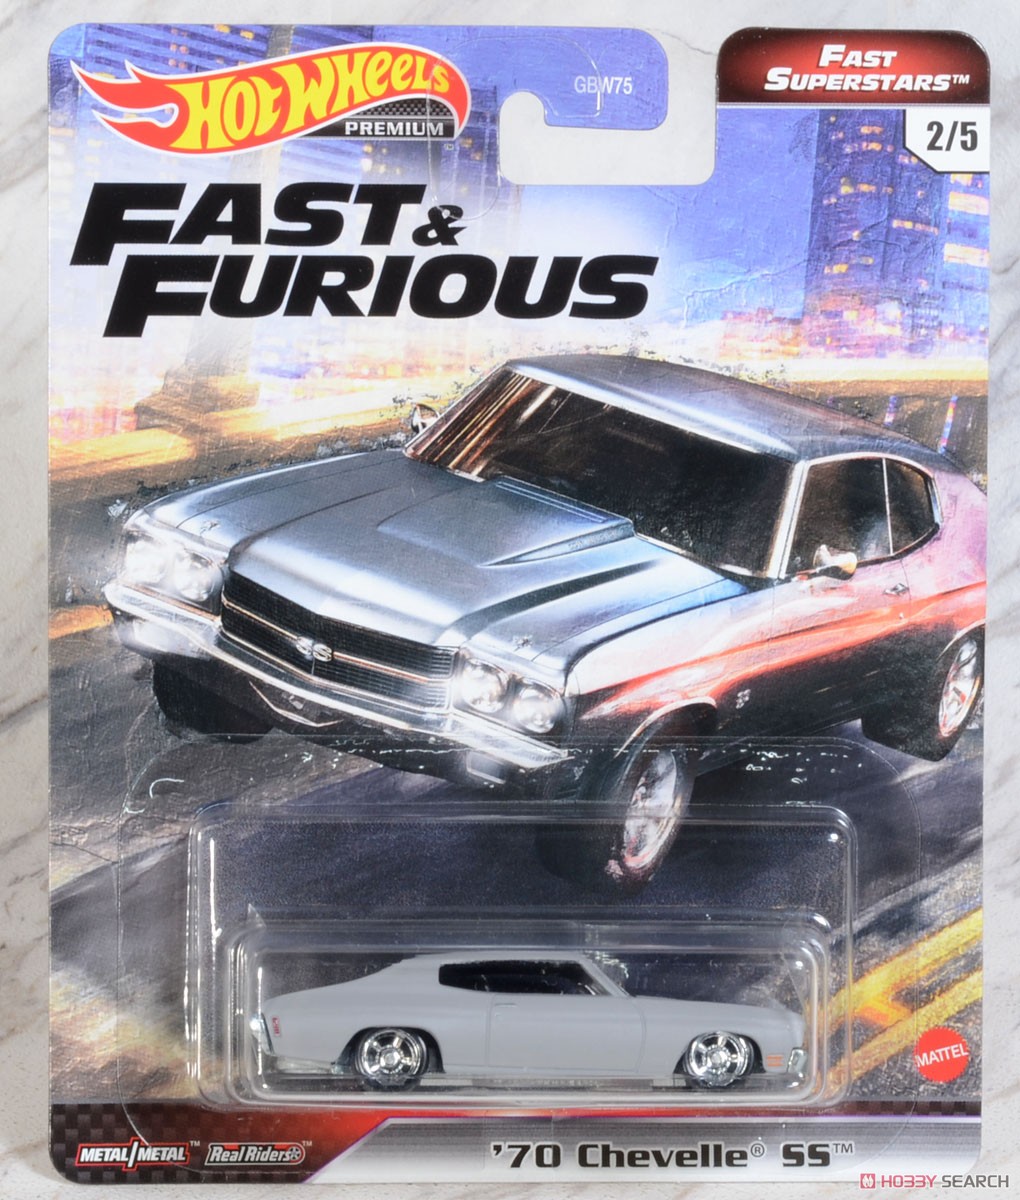 HW The Fast and the Furious Premium Fast Super Stars `70 Chevelle SS (Toy) Package2